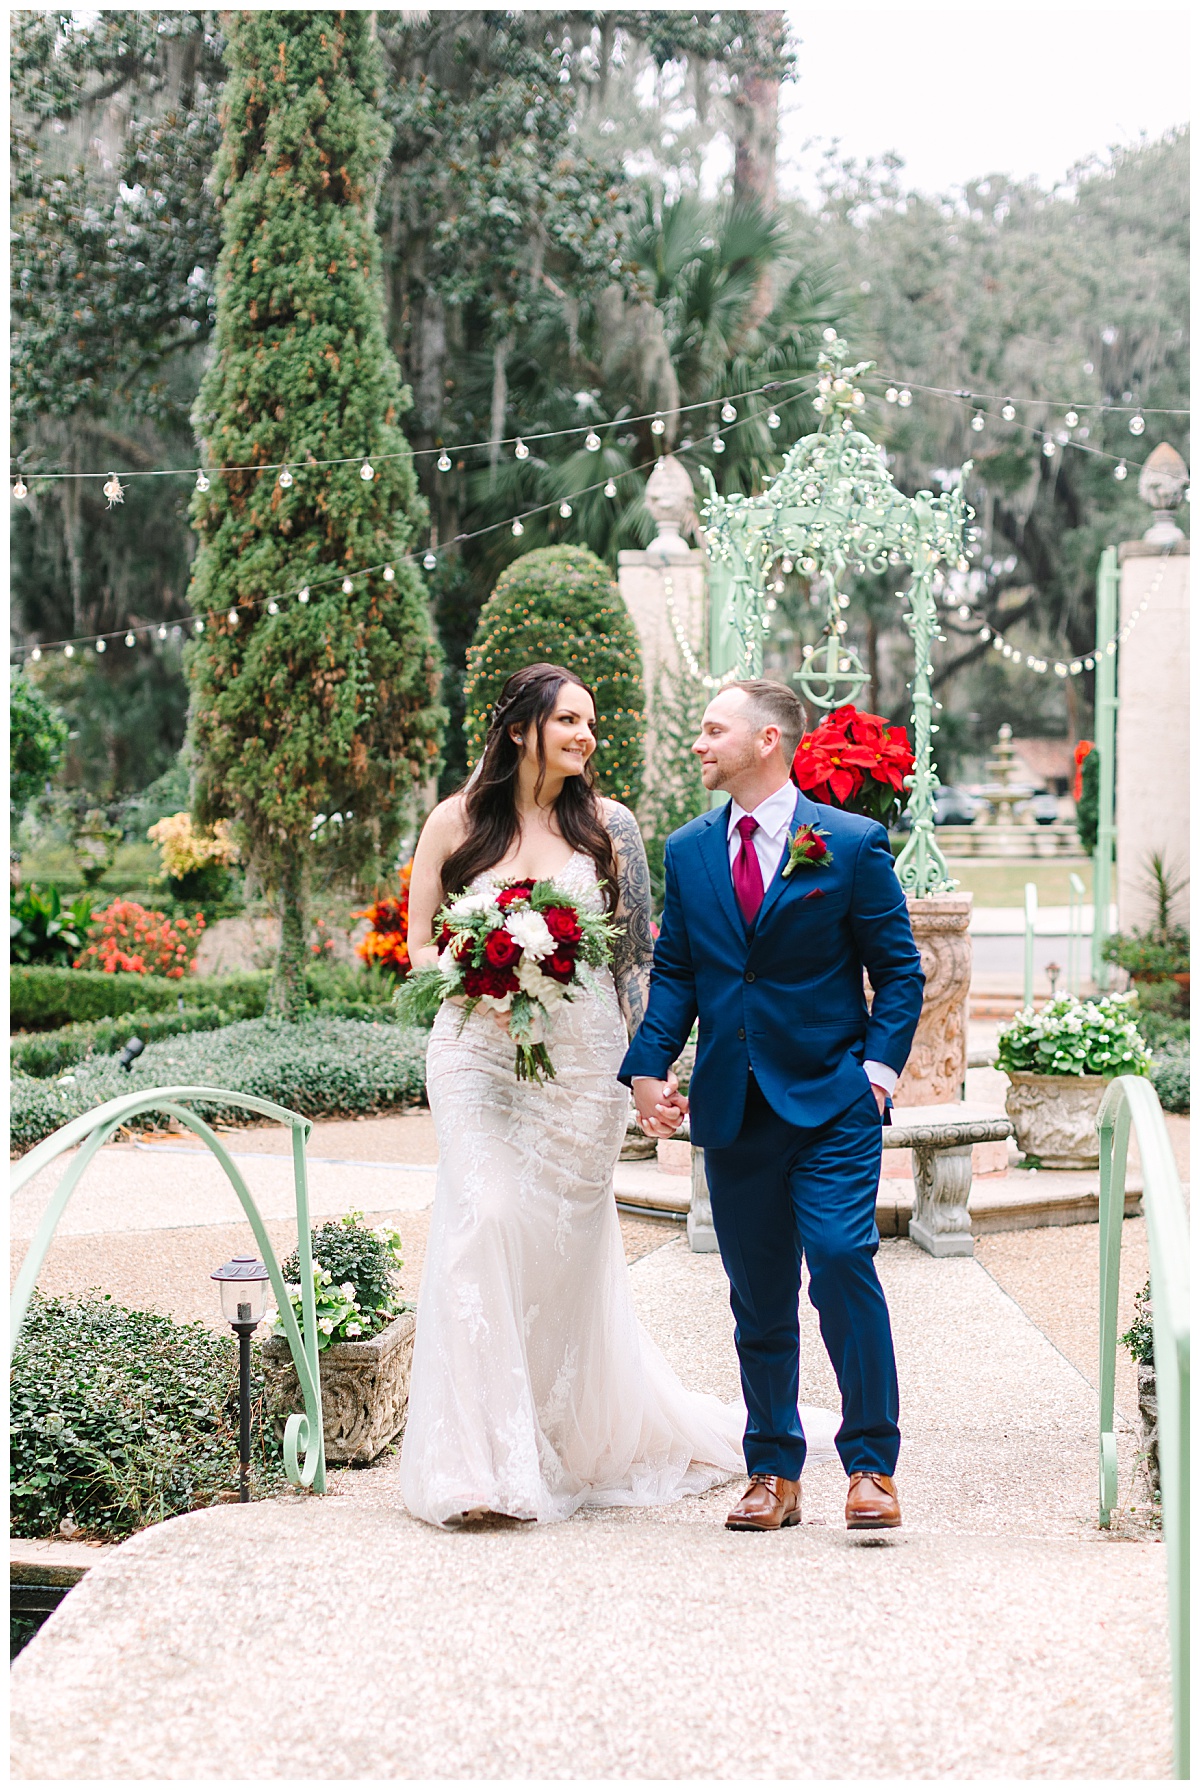 A bride and groom stroll hand-in-hand on the grounds of their Florida wedding venue.